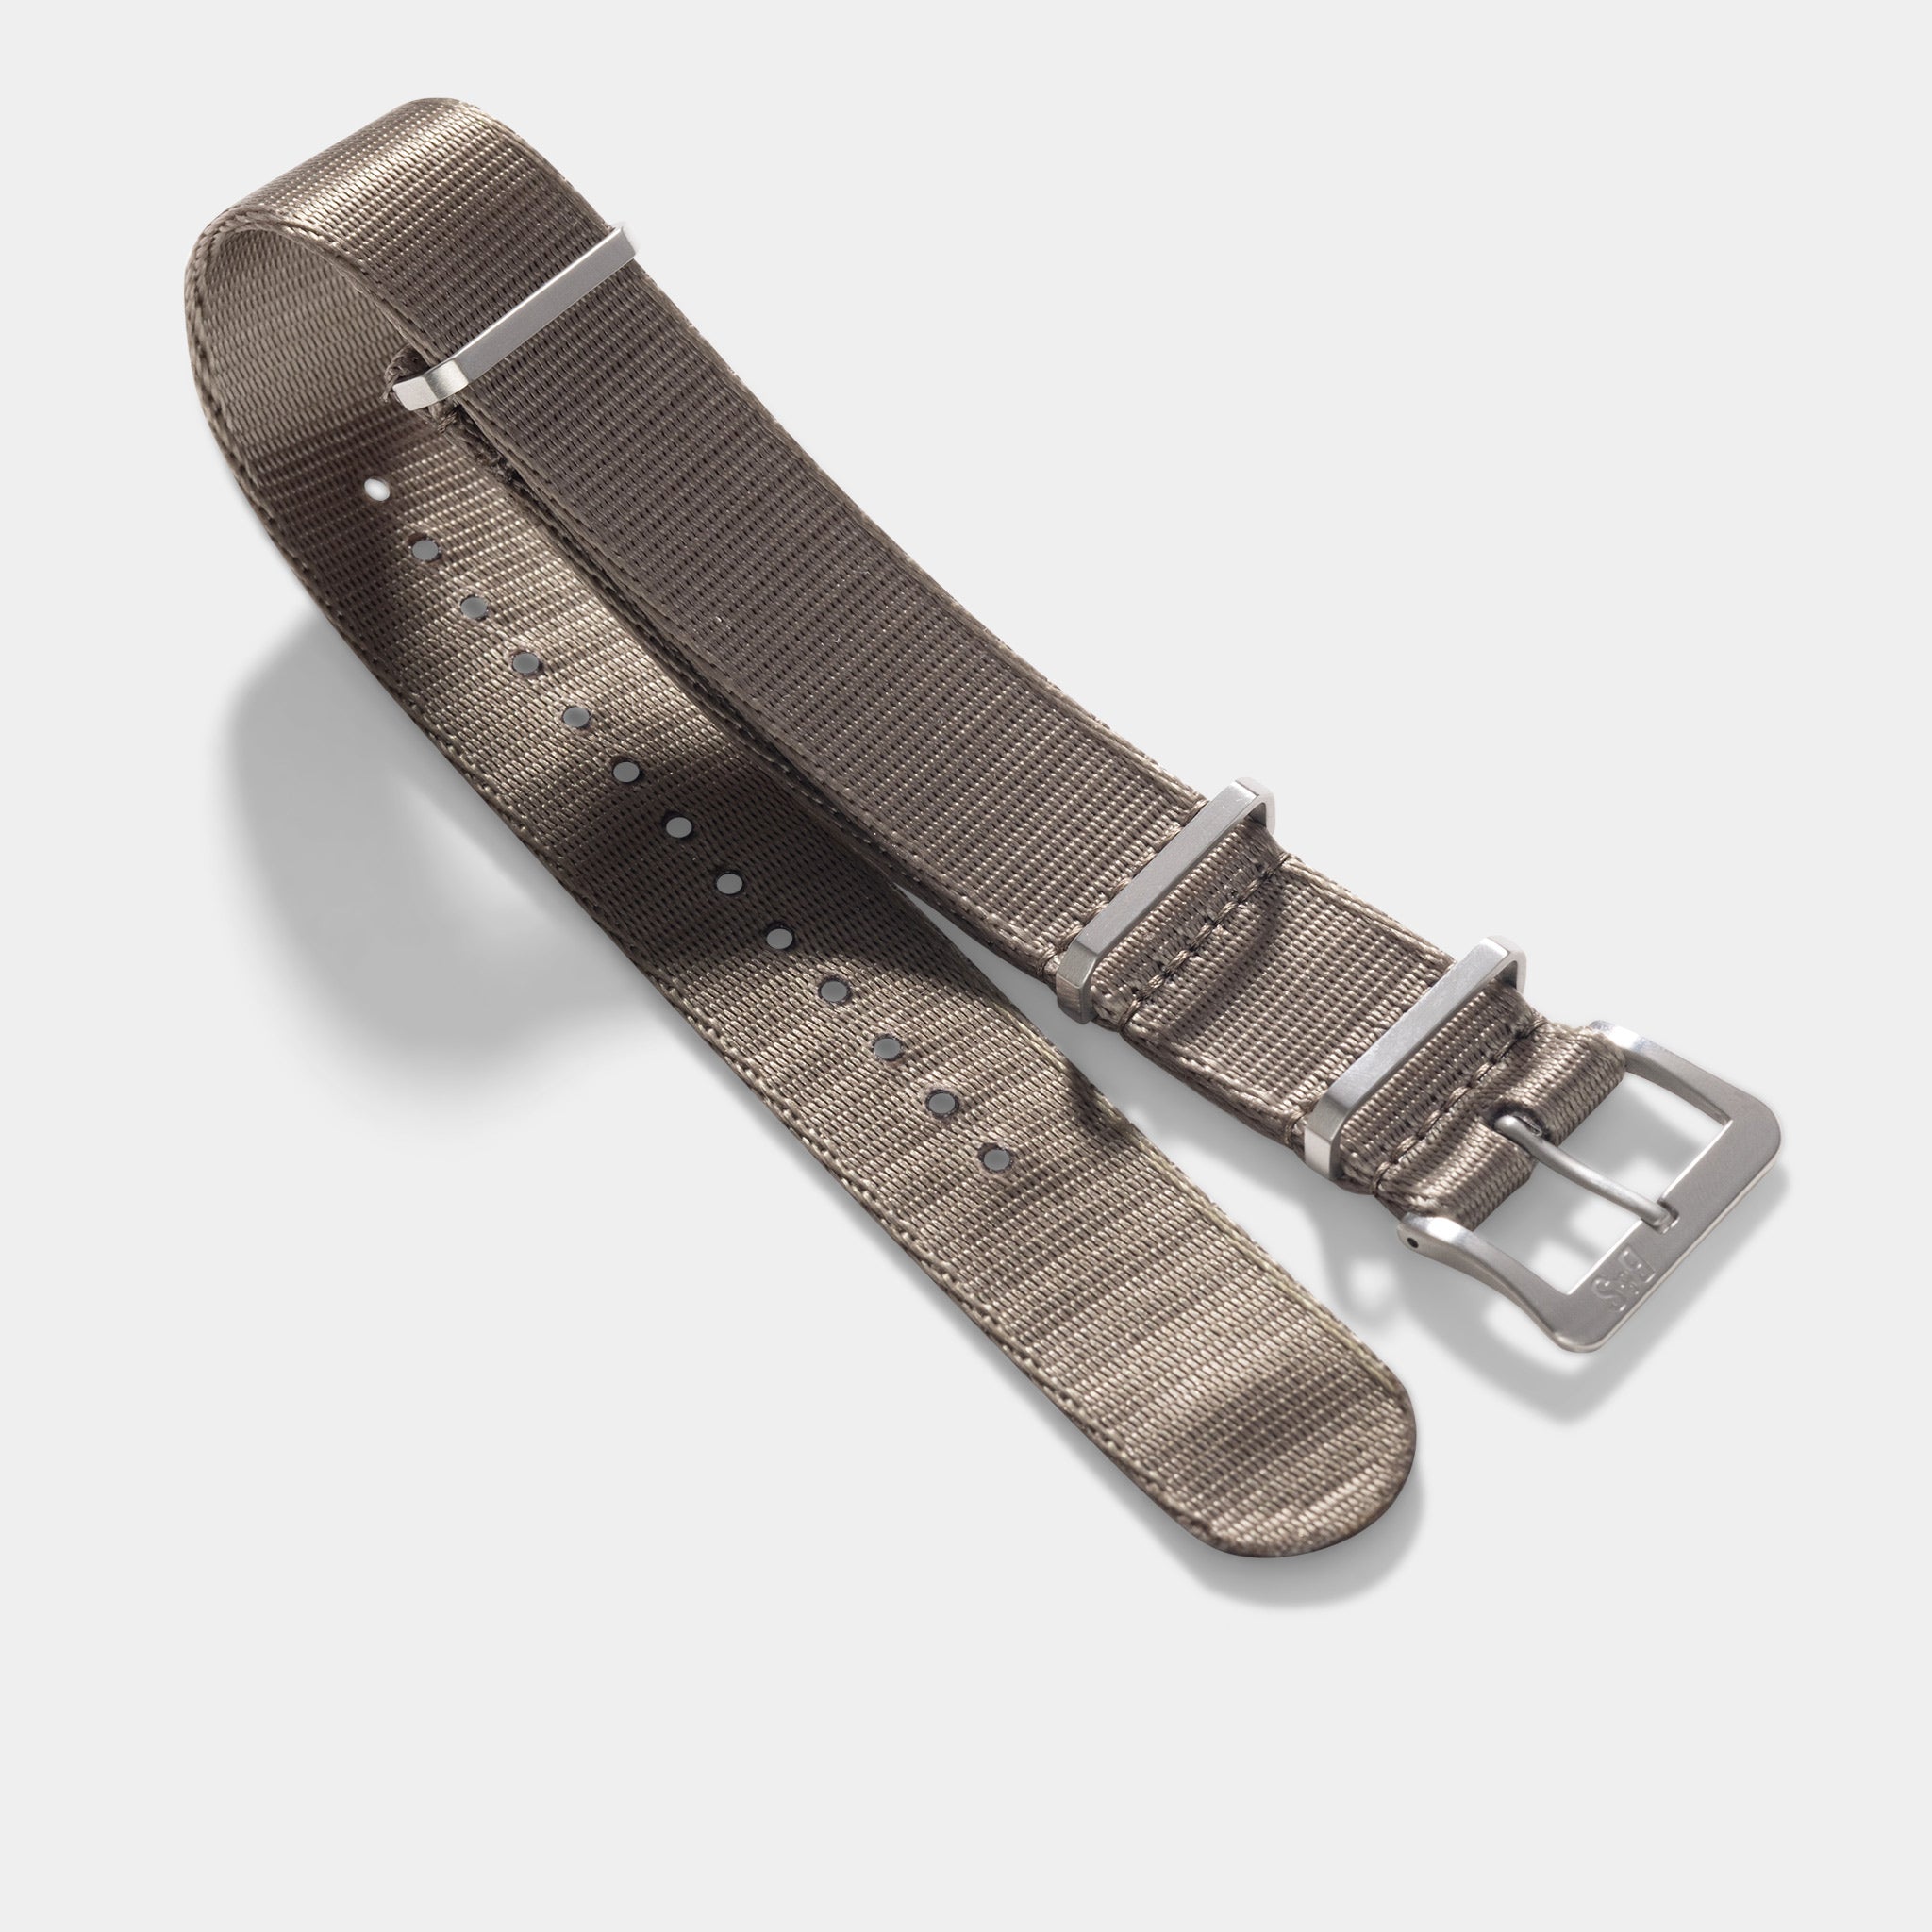 Deluxe Nylon Single Pass Watch Strap Taupe GreyDeluxe Nylon Single Pass Watch Strap Taupe Grey